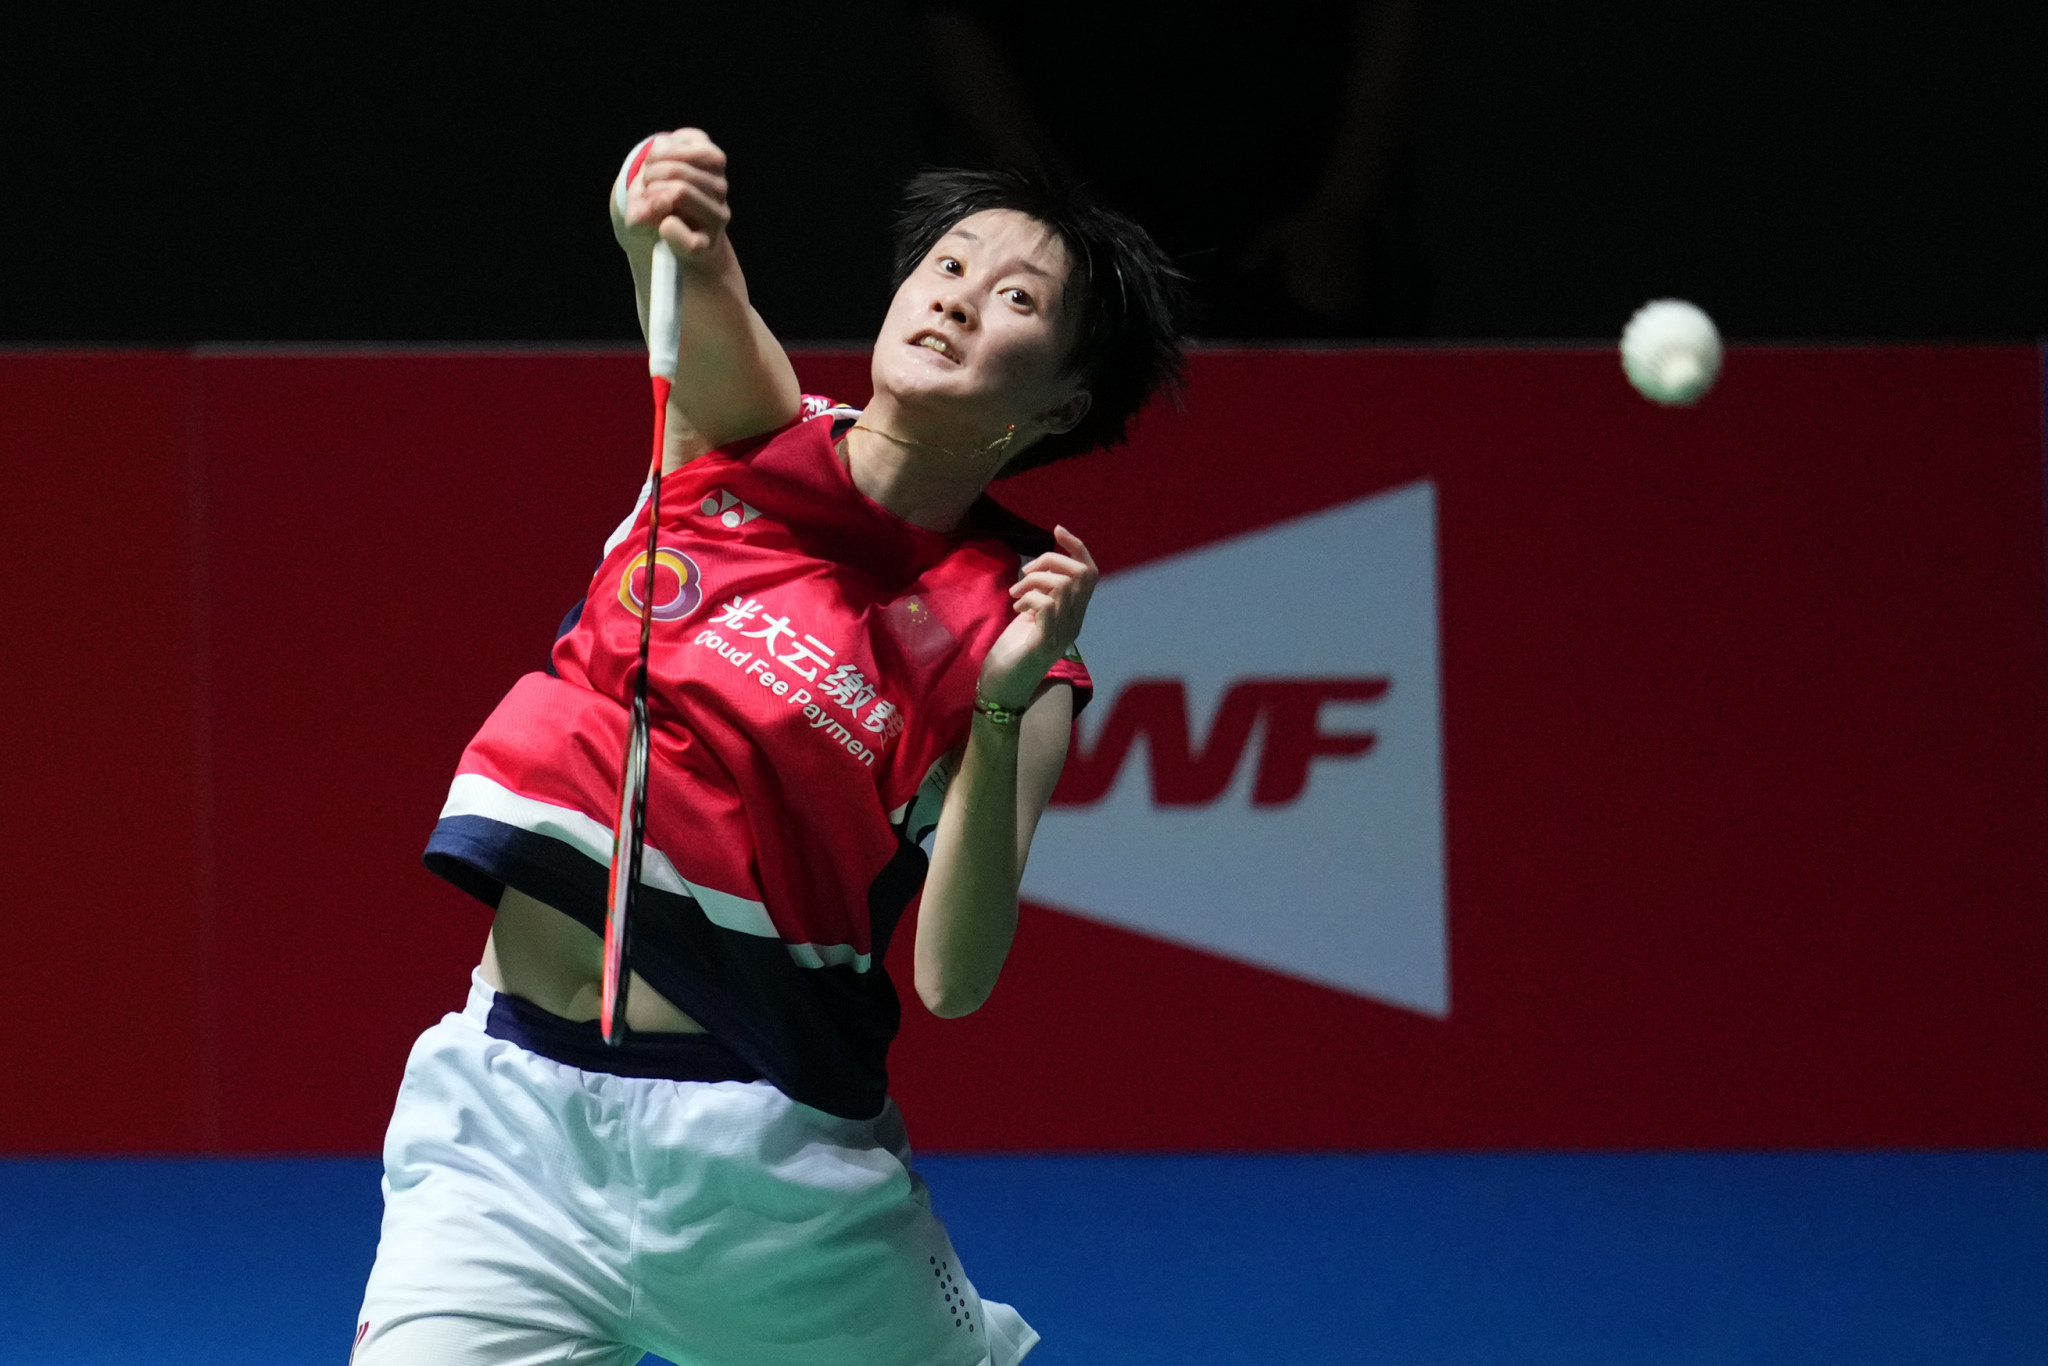 Reigning Olympic women's singles champion Yu Fei Chen reached the All England Open final after knocking out top seed Akane Yamaguchi ©Getty Images